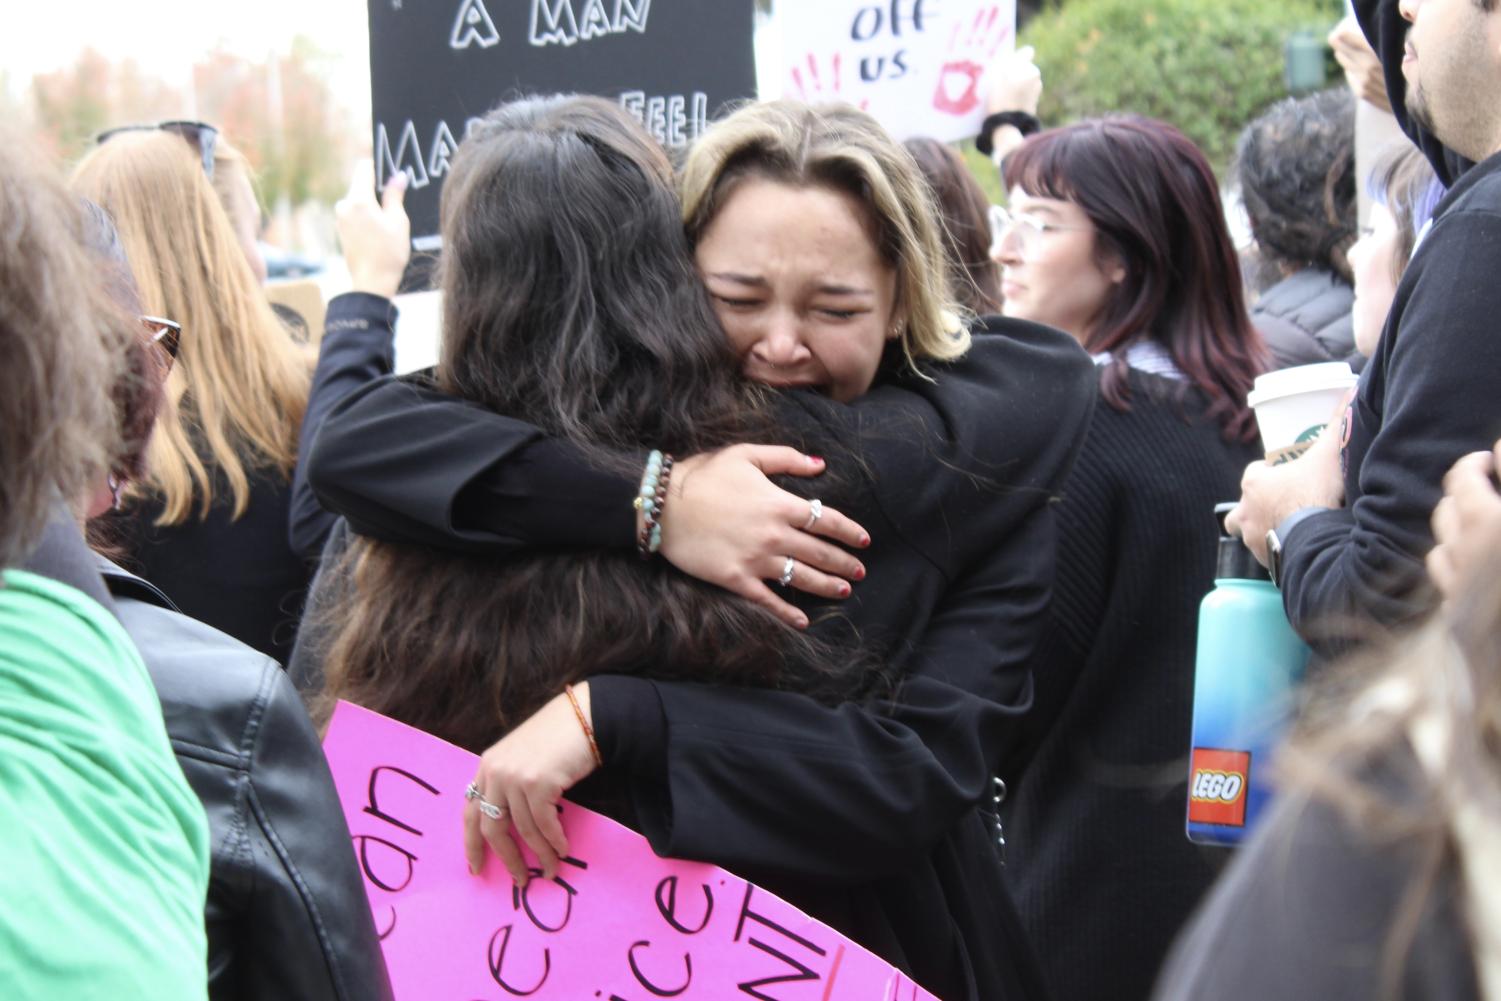 Leader and coordinator of the protest, Isa Rojas, embraces a fellow protestor after delivering a heartful speech to the crowd on Dec. 15, 2022.